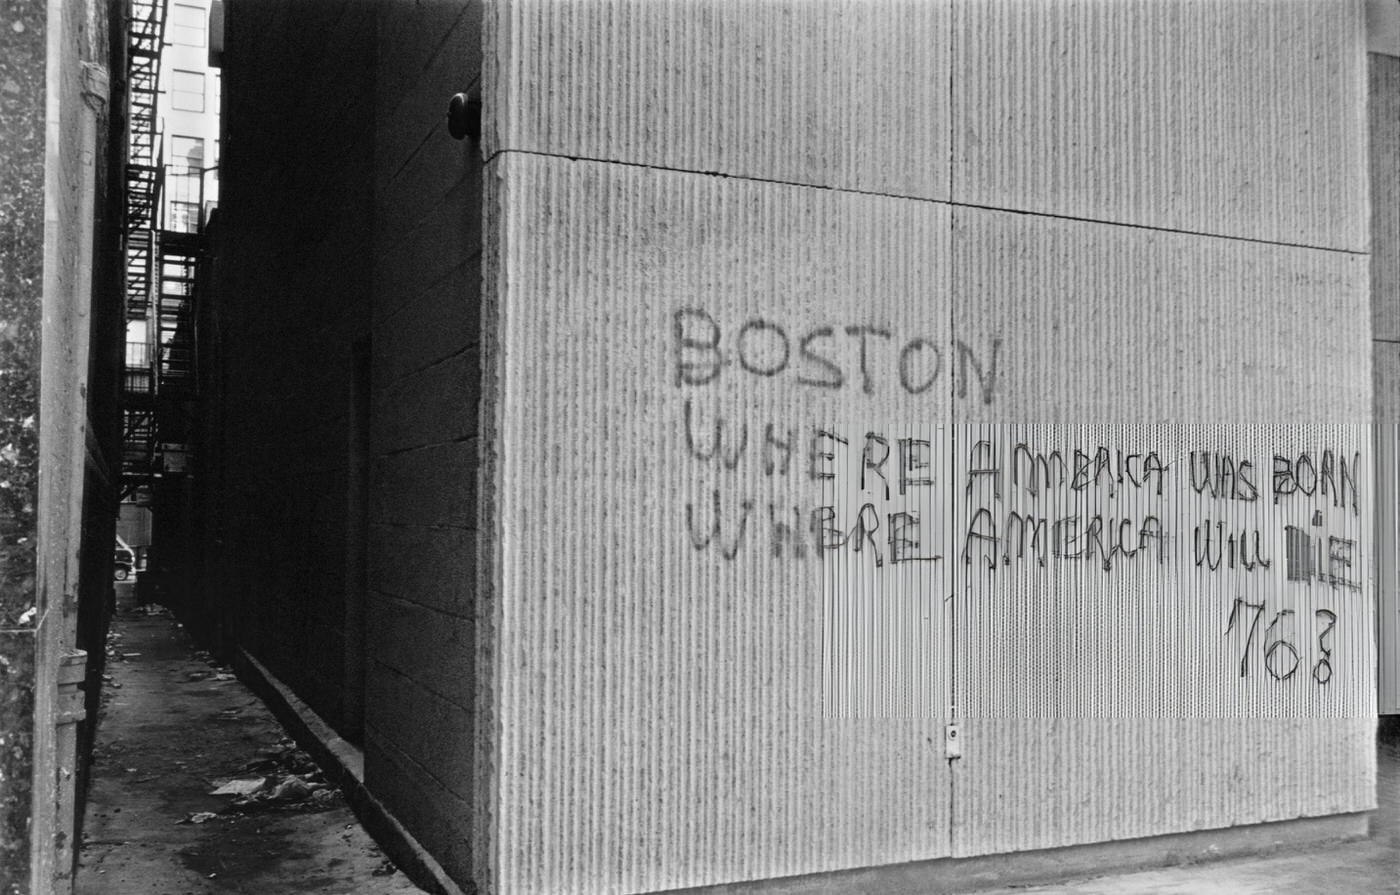 Graffiti on a wall in Boston, Massachusetts, during the United States Bicentennial, 1976.